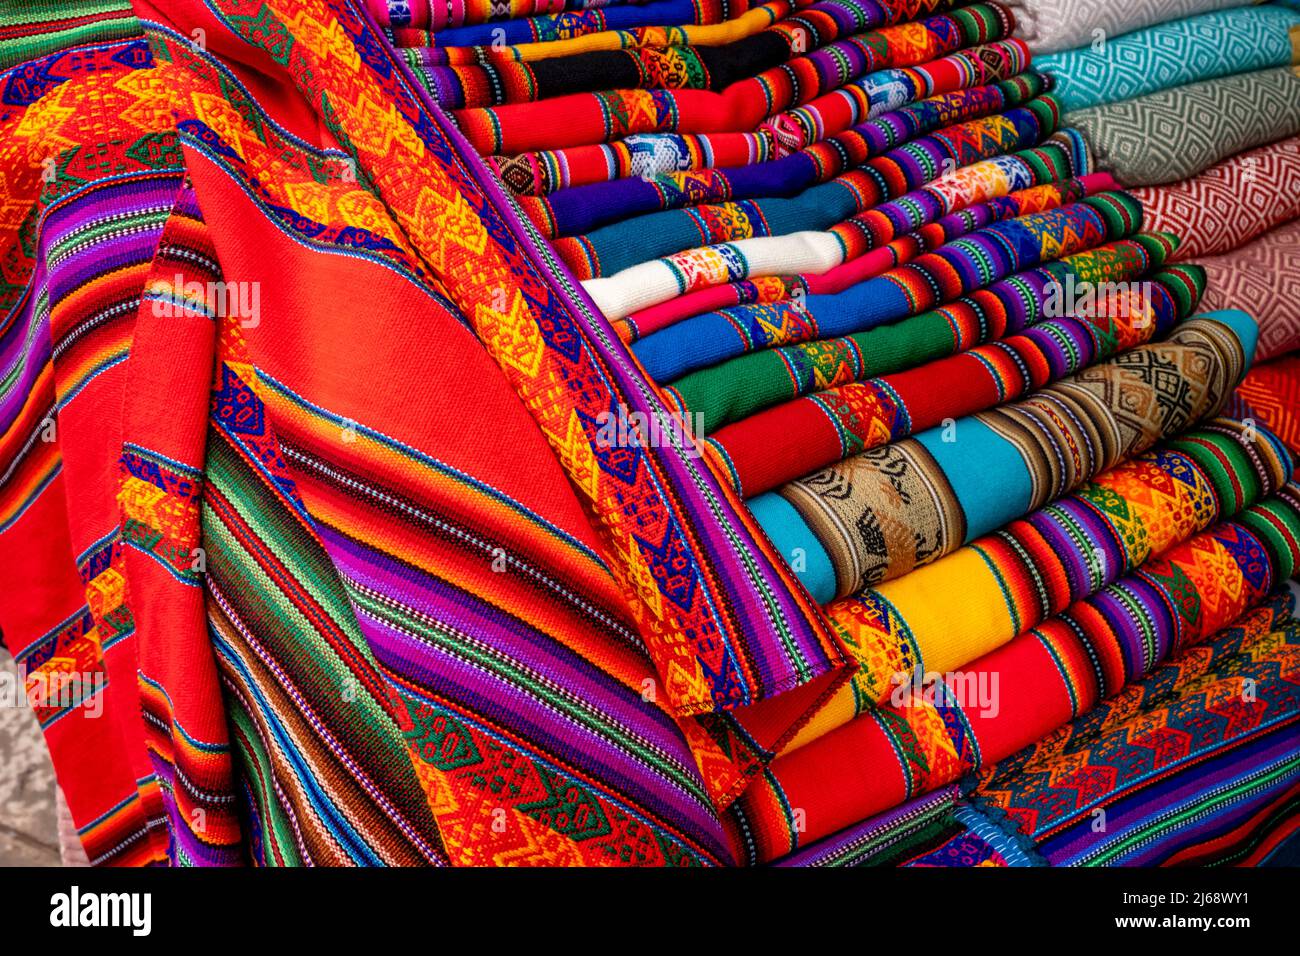 Colourful Shawls/Blankets For Sale In The Market At Pisac, The Sacred Valley, Calca Province, Peru. Stock Photo